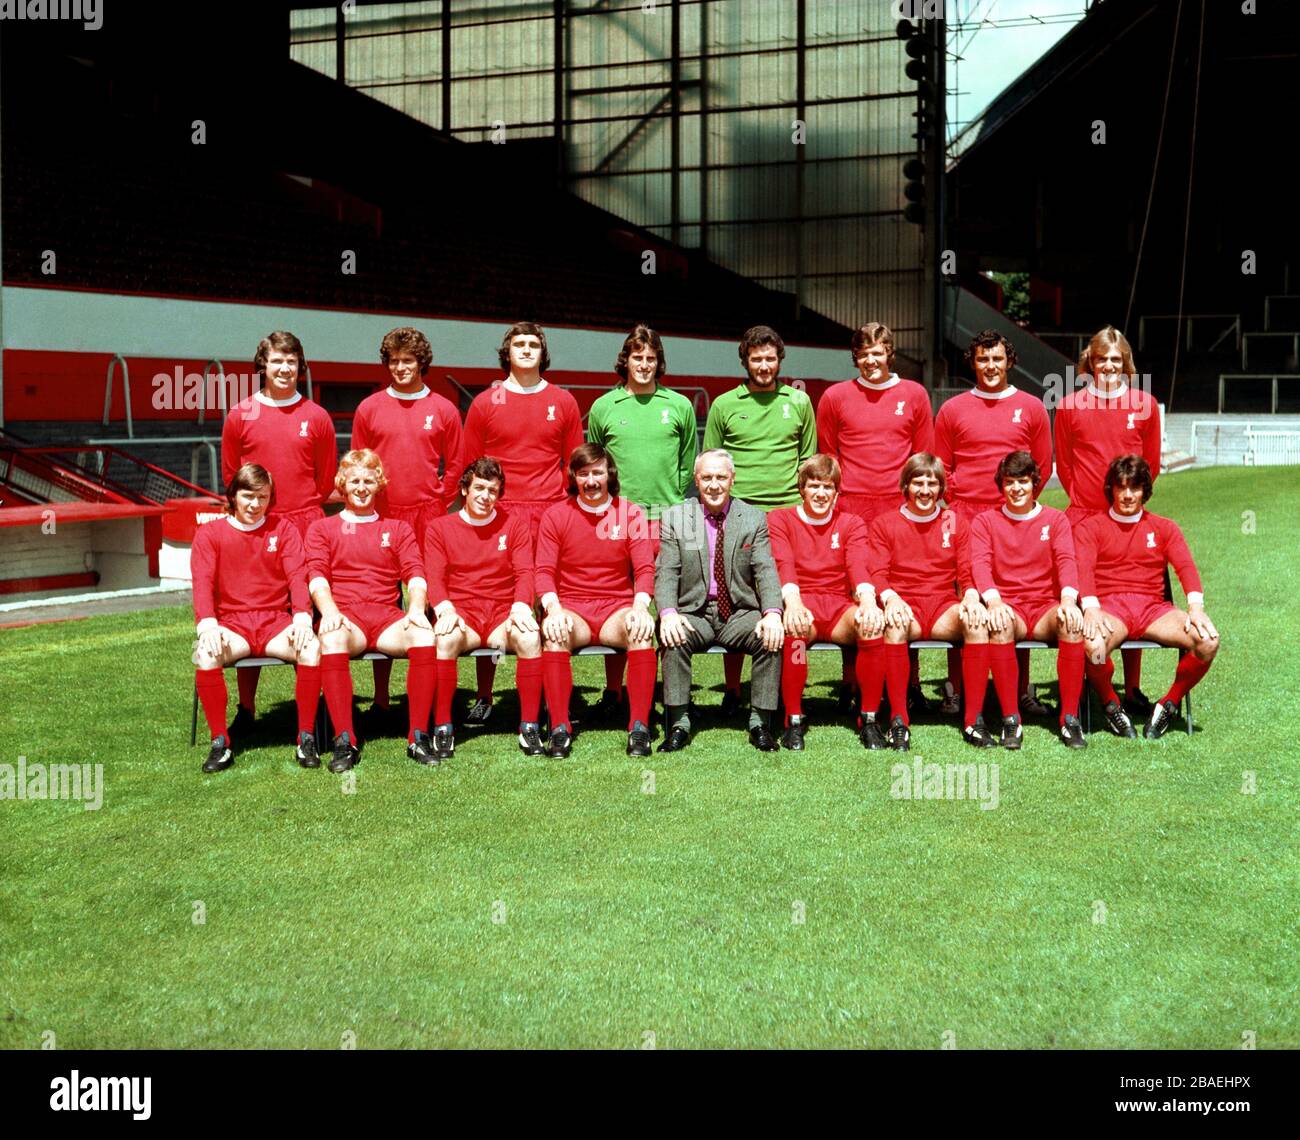 Liverpool first team squad: (back row, l-r) Chris Lawler, Phil Boersma, Larry Lloyd, Ray Clemence, Frank Lane, John Toshack, Ray Kennedy, Phil Thompson; (front row, l-r) Brian Hall, Alec Lindsay, Ian Callaghan, Tommy Smith, manager Bill Shankly, Emlyn Hughes, Steve Heighway, Peter Cormack, Kevin Keegan Stock Photo